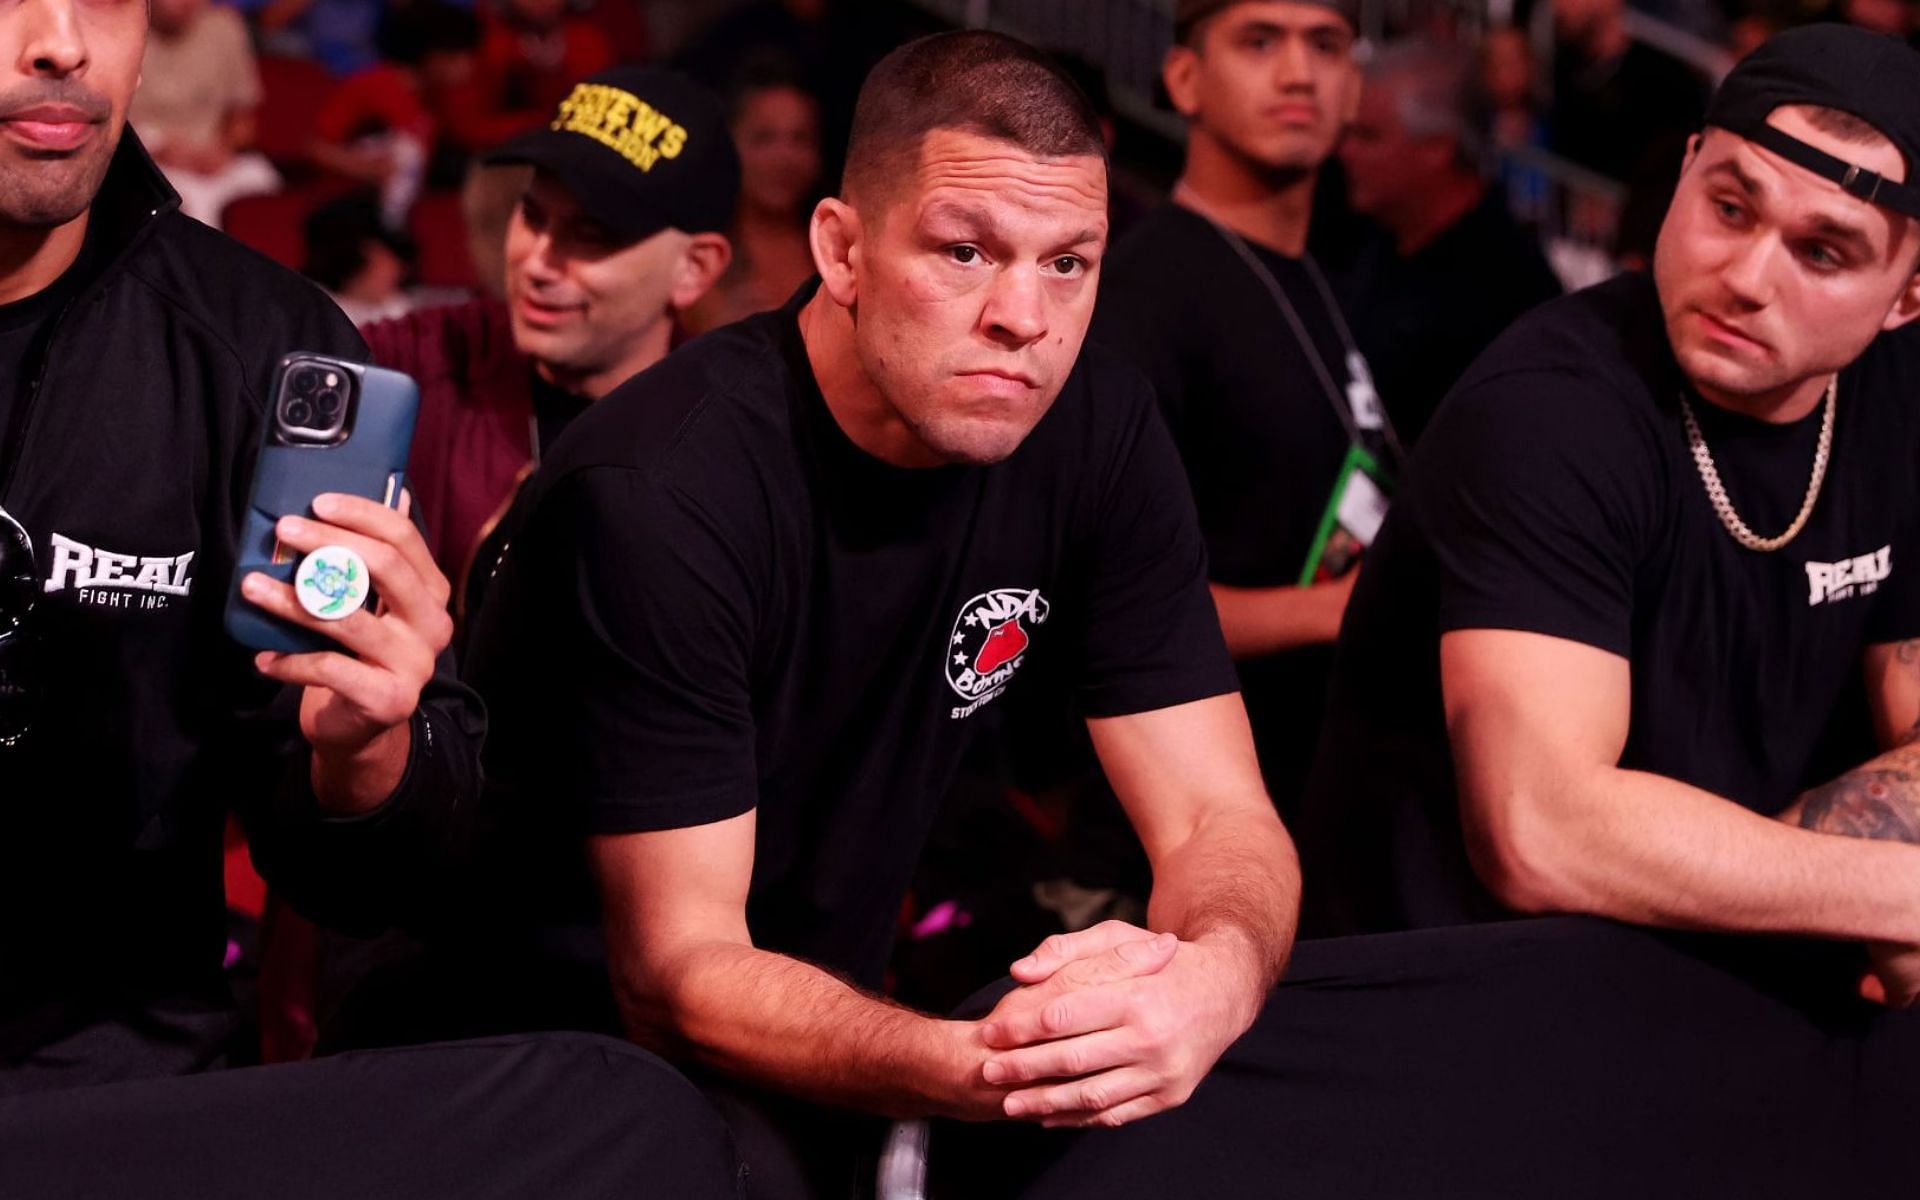 Nate Diaz has turned himself in to the New Orleans Police department